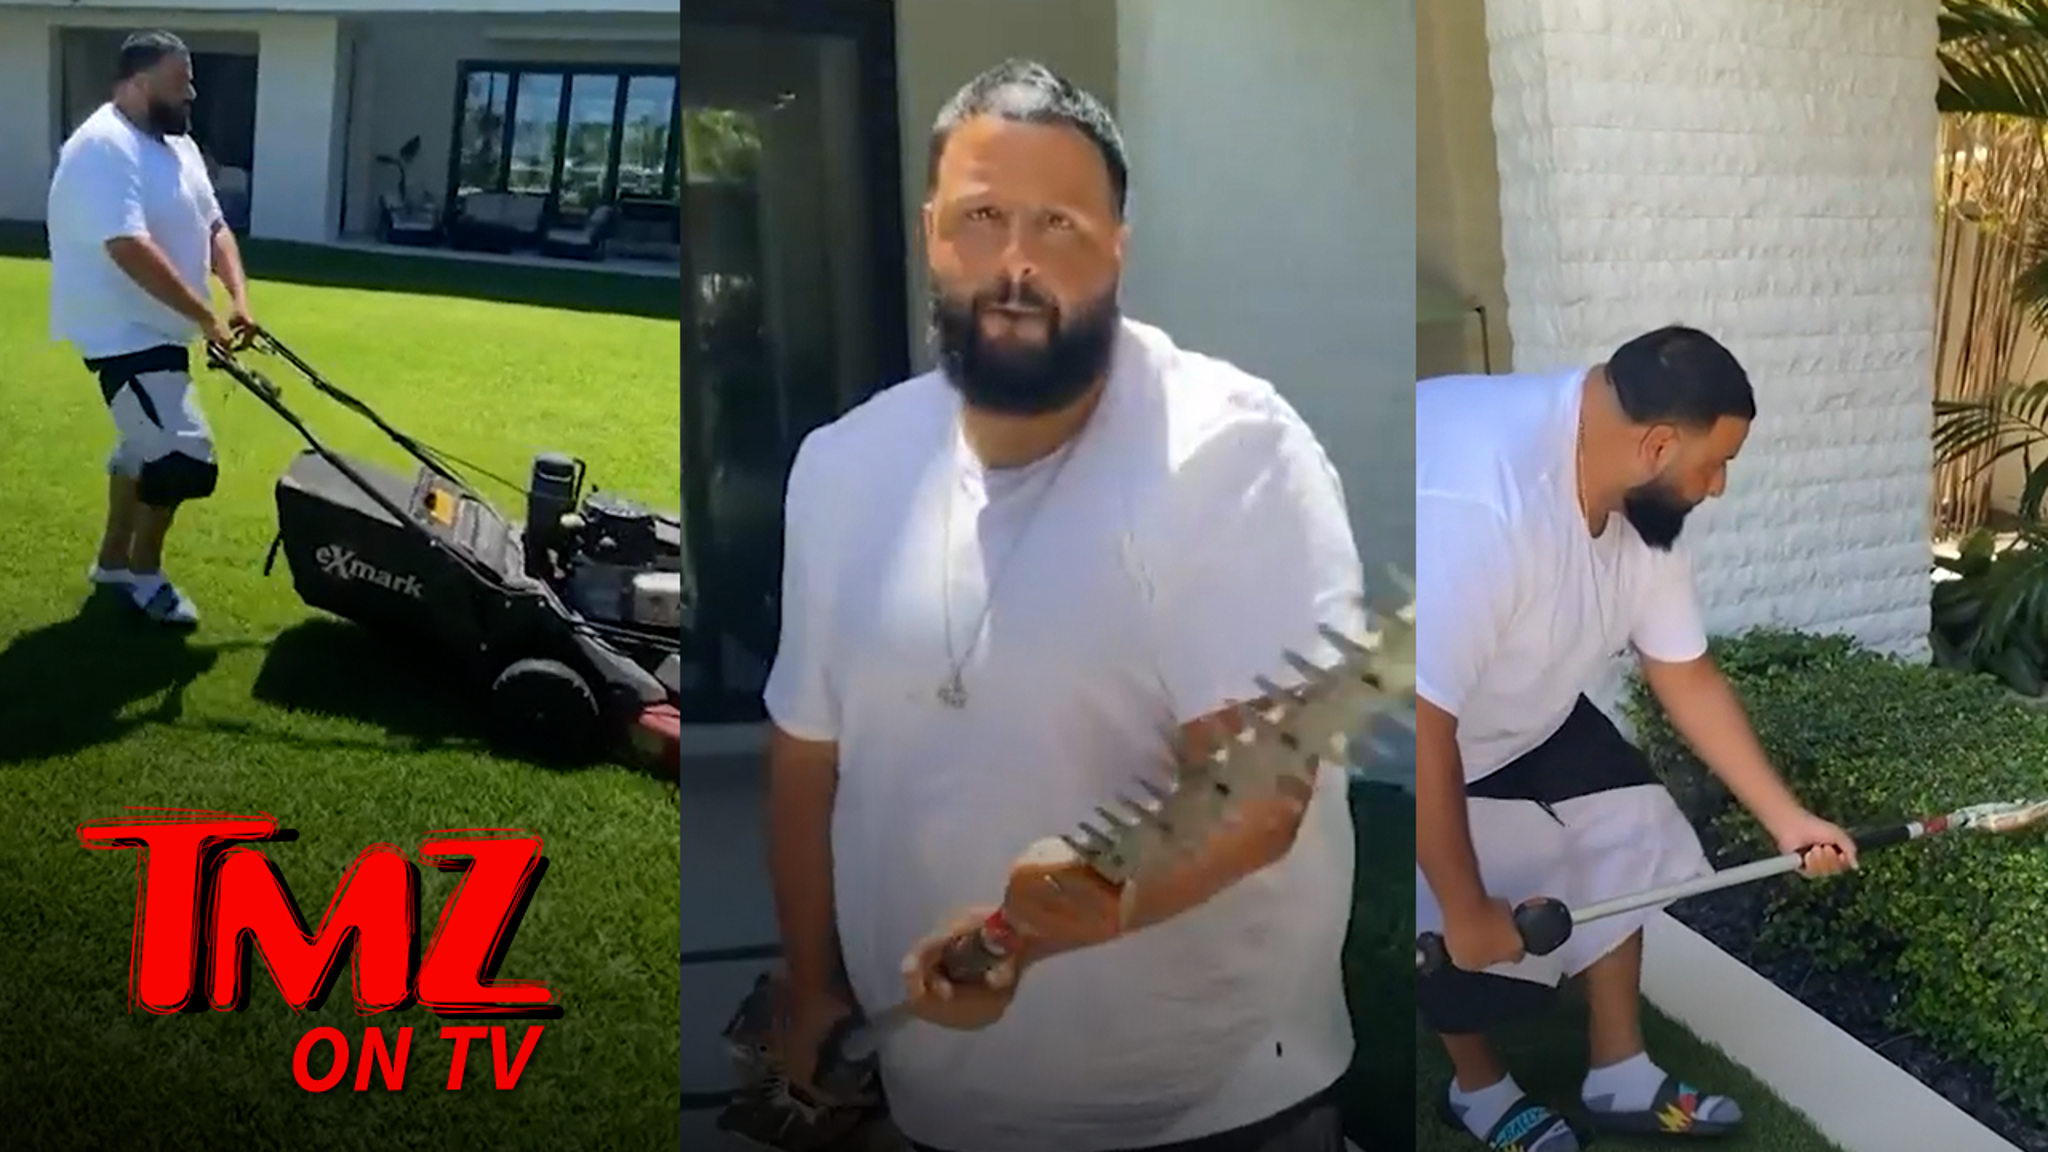 DJ Khaled Takes a Break From His Music